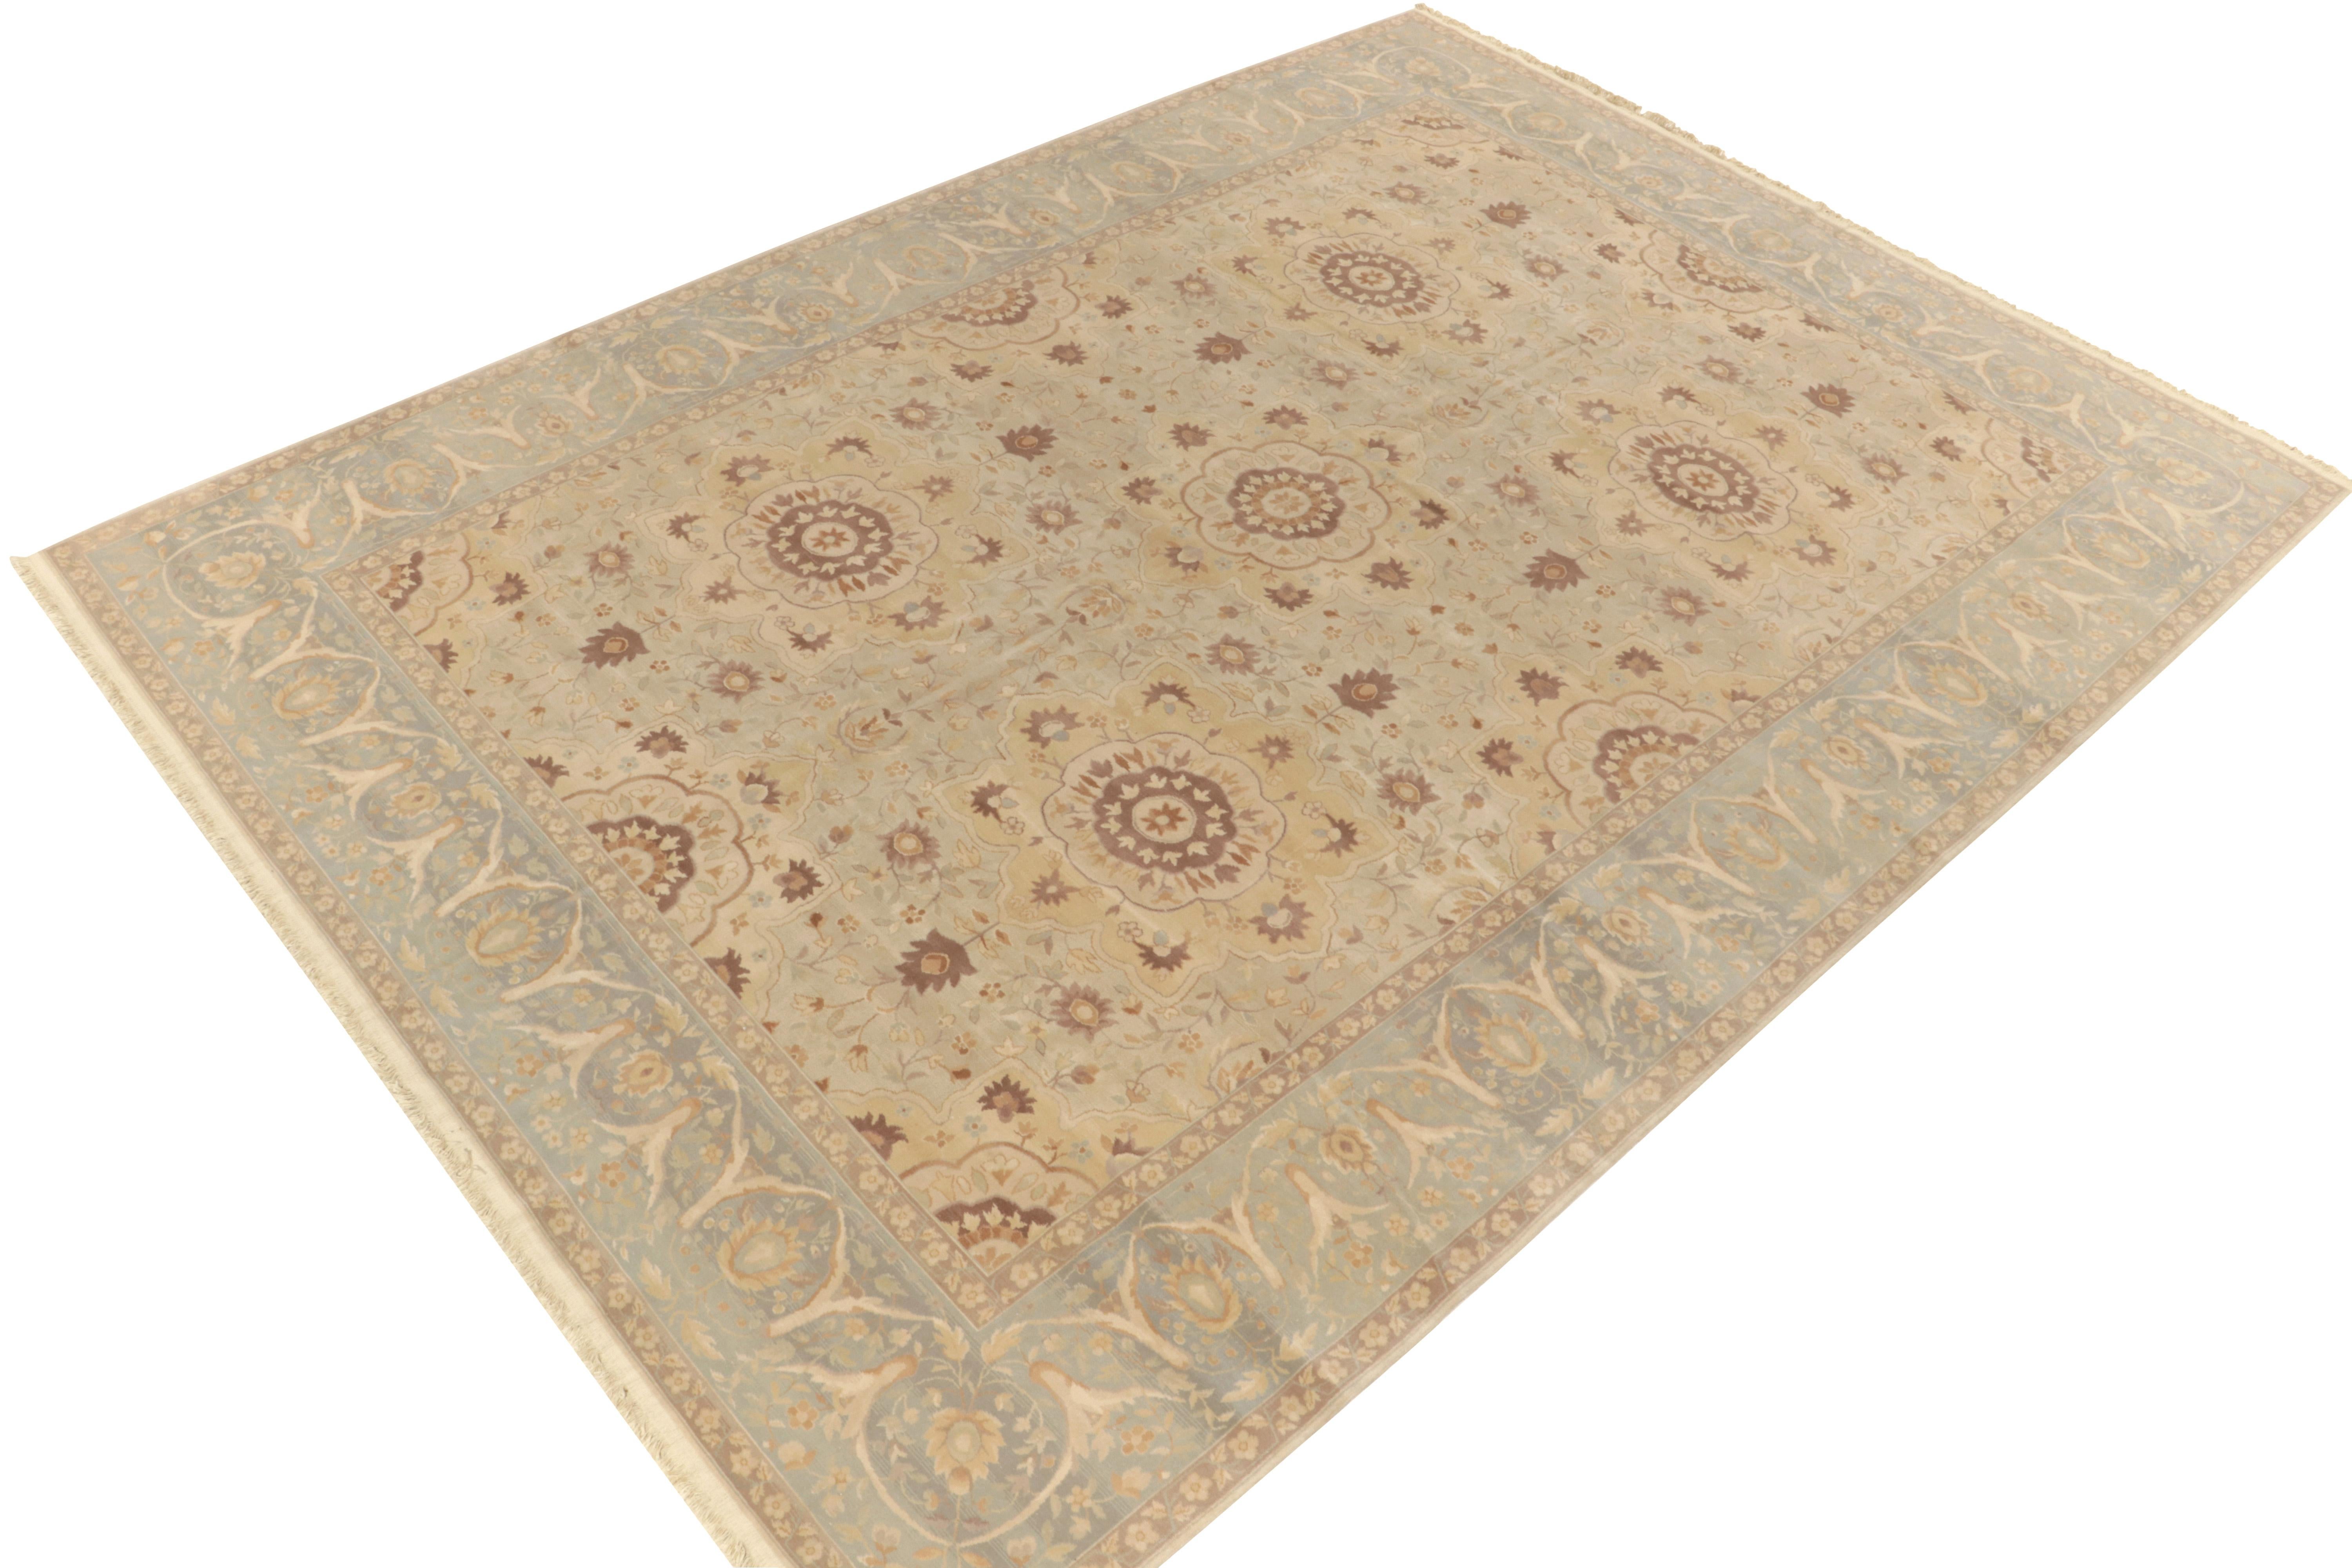 Hand-Knotted Rug & Kilim's Sultanabad Style Rug in Beige-Brown & Blue Floral Pattern For Sale